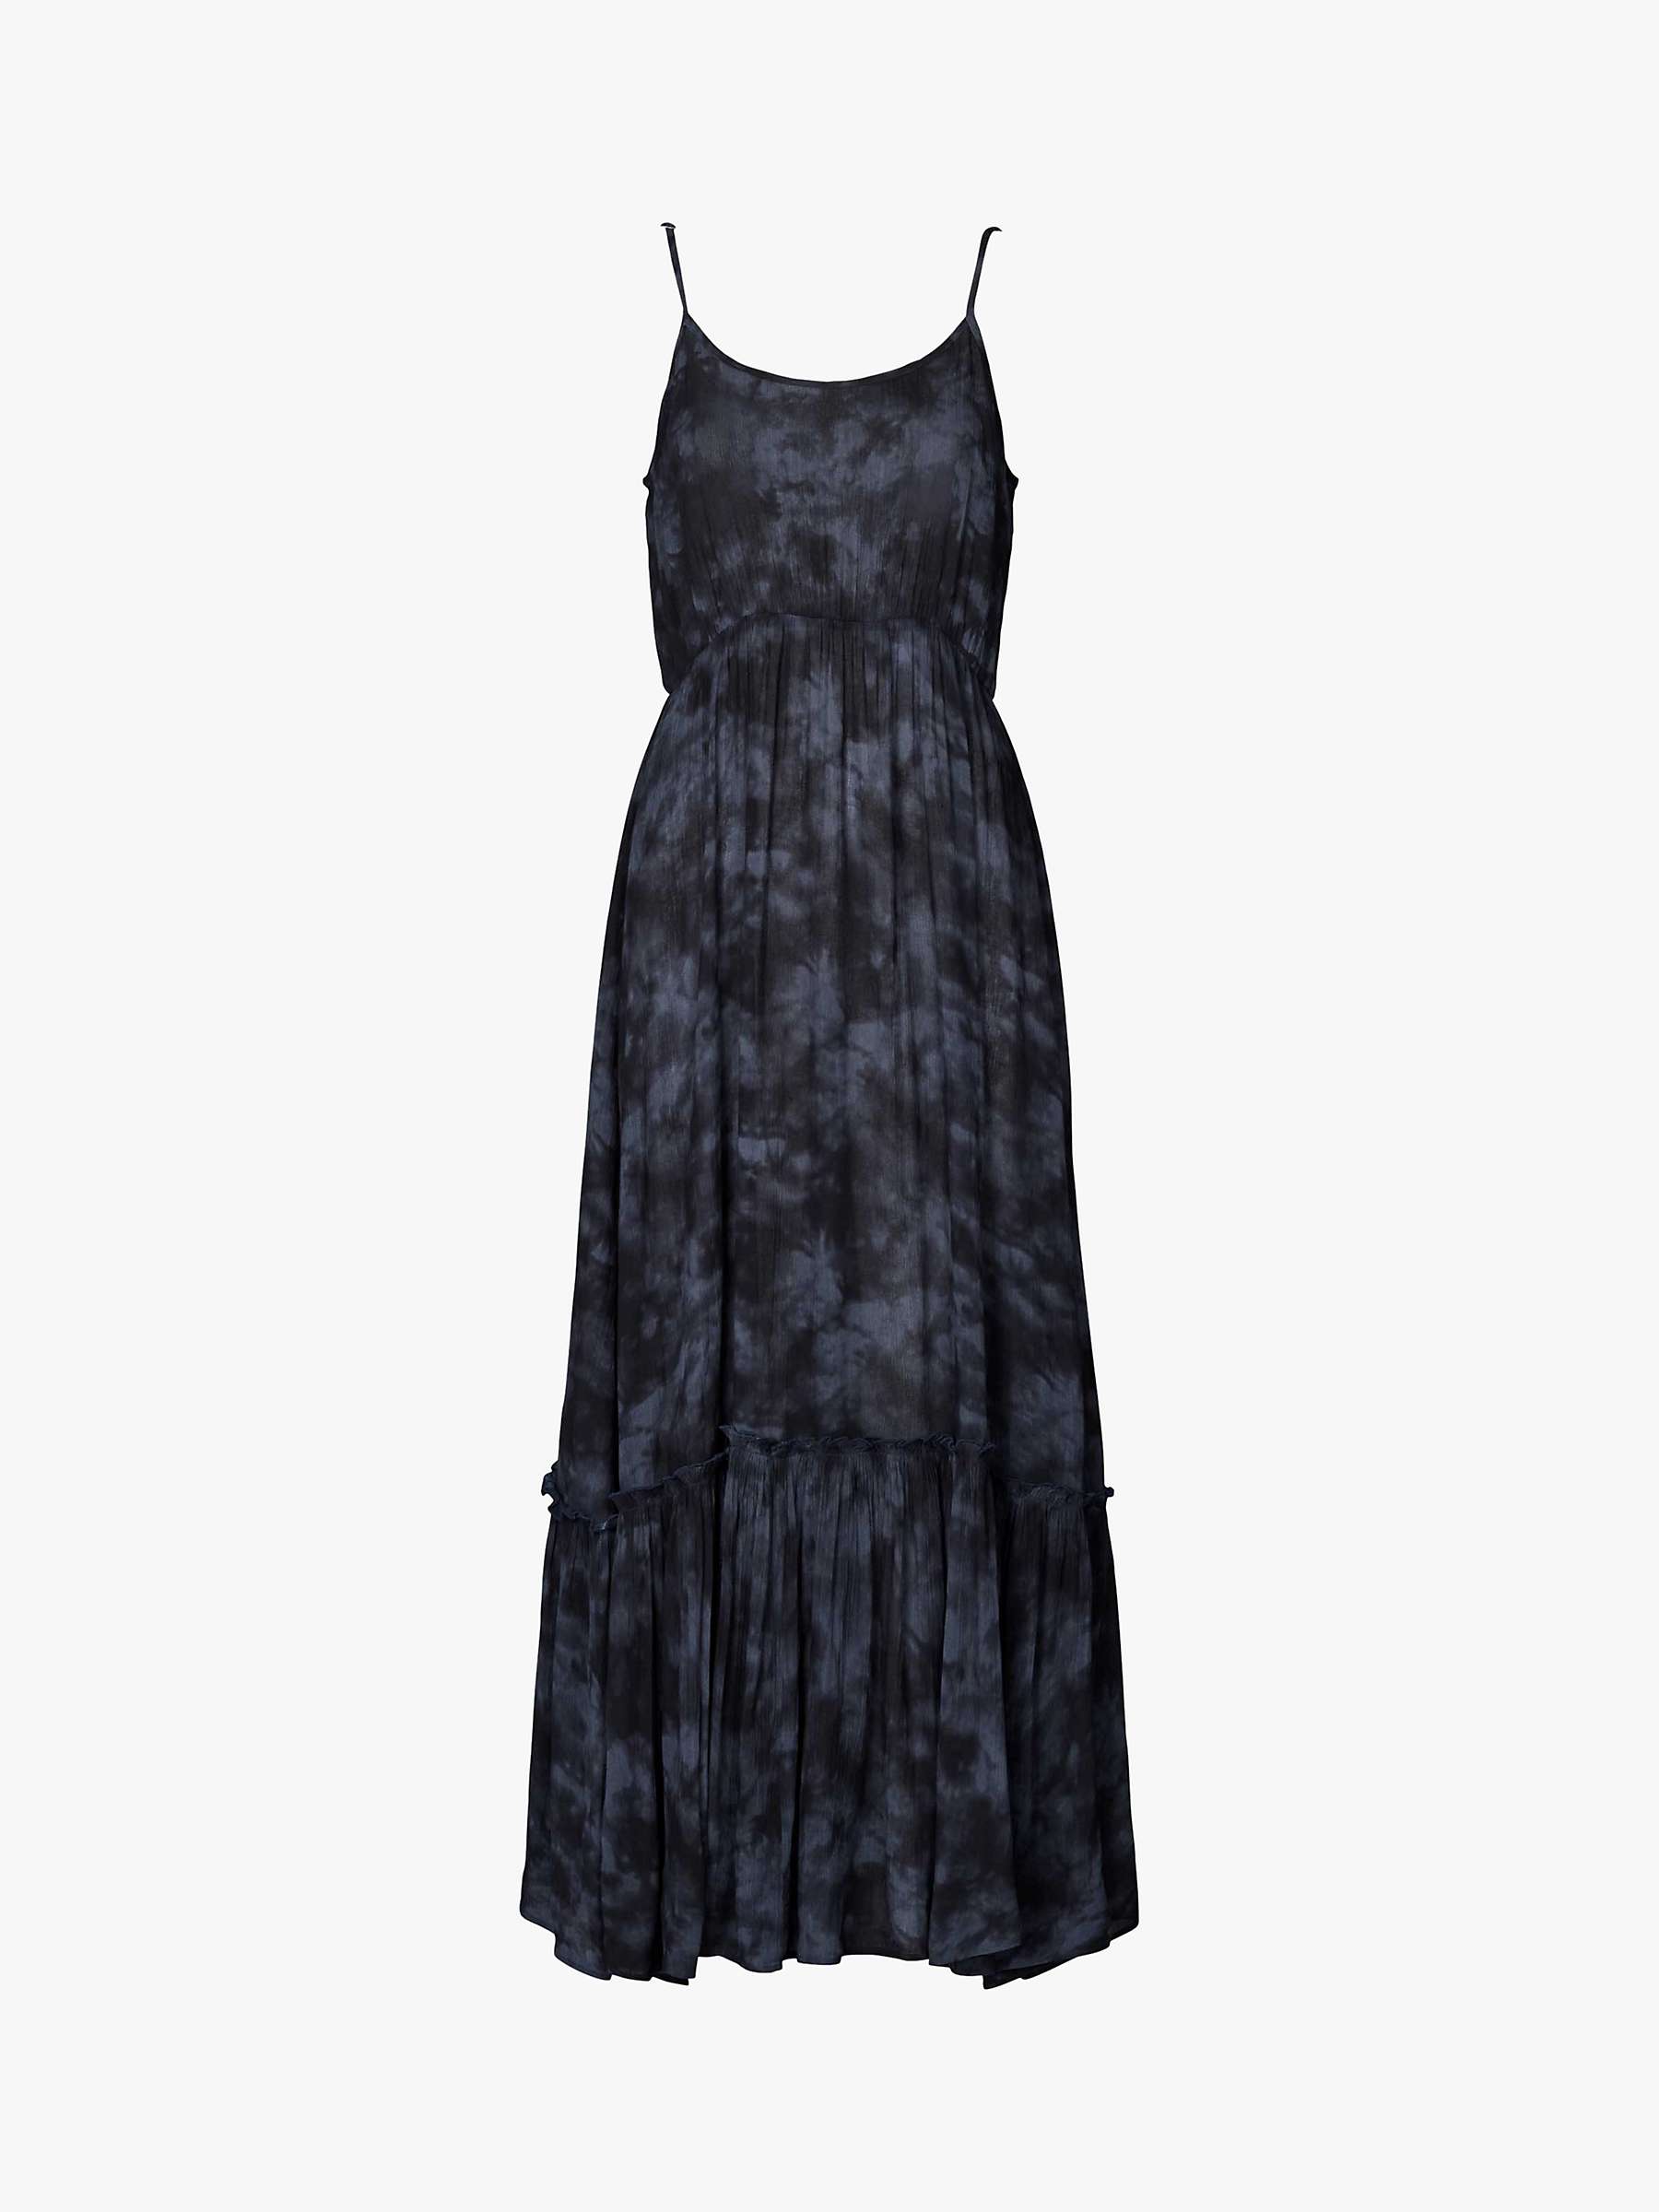 Buy Lollys Laundry Uno Maxi Dress, Washed Black Online at johnlewis.com